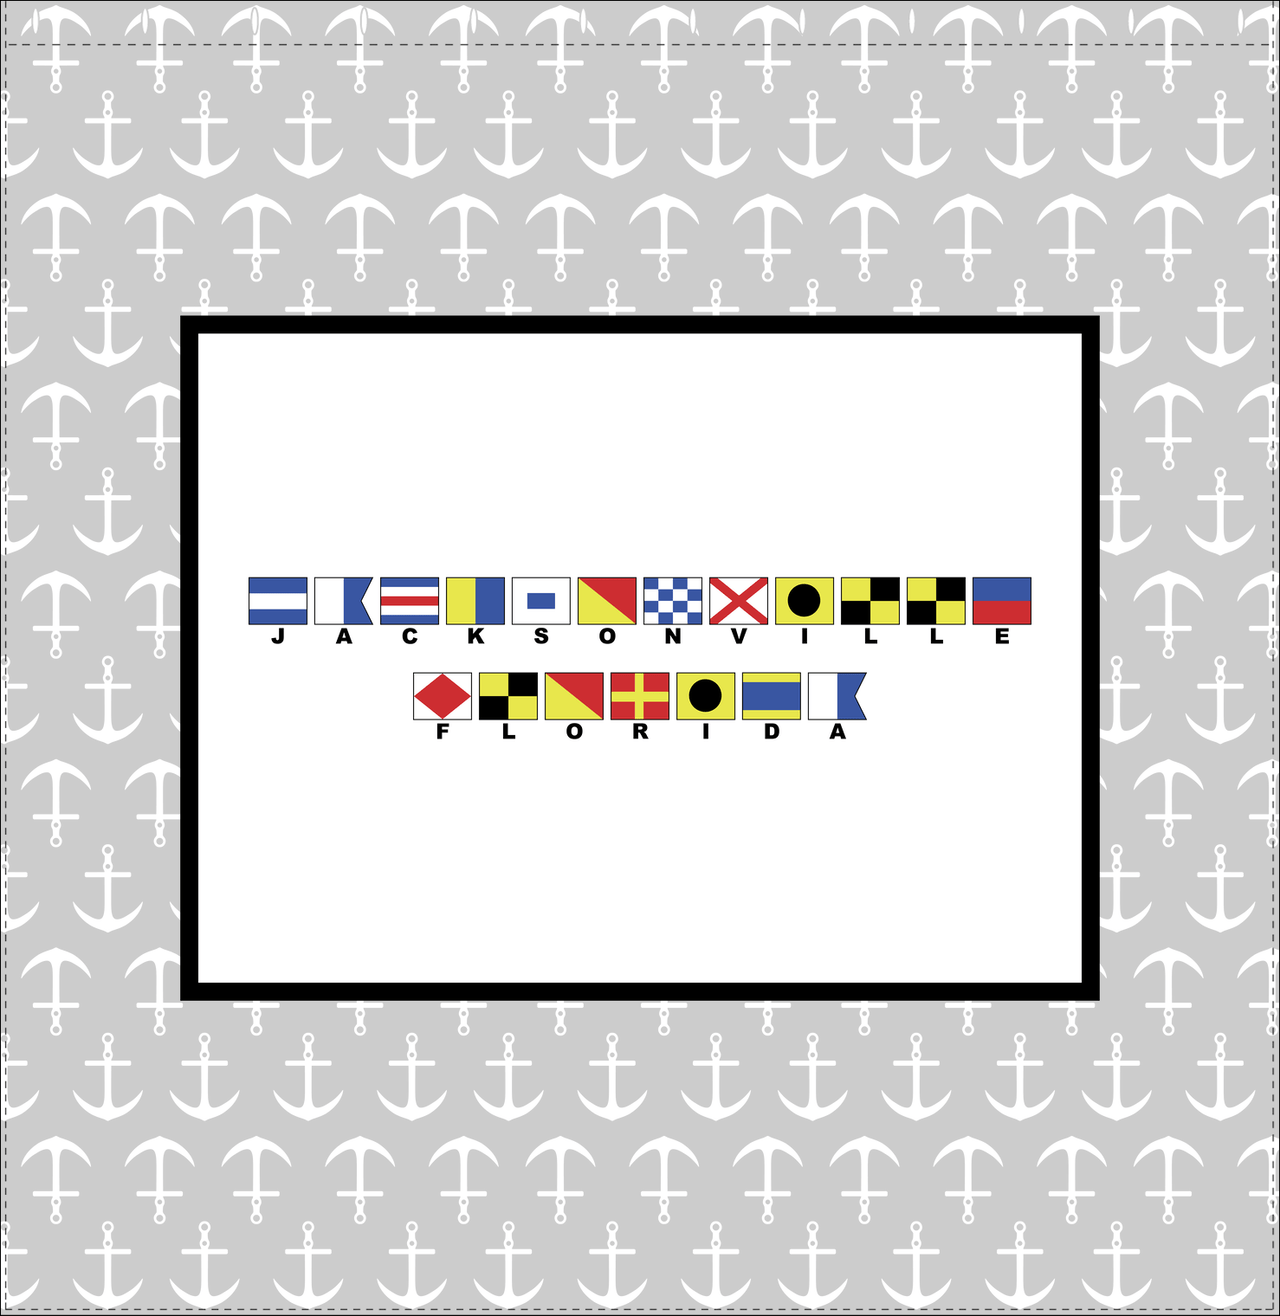 Personalized Nautical Flags Shower Curtain with Anchors - Grey and Black - Flags with Small Letters - Decorate View